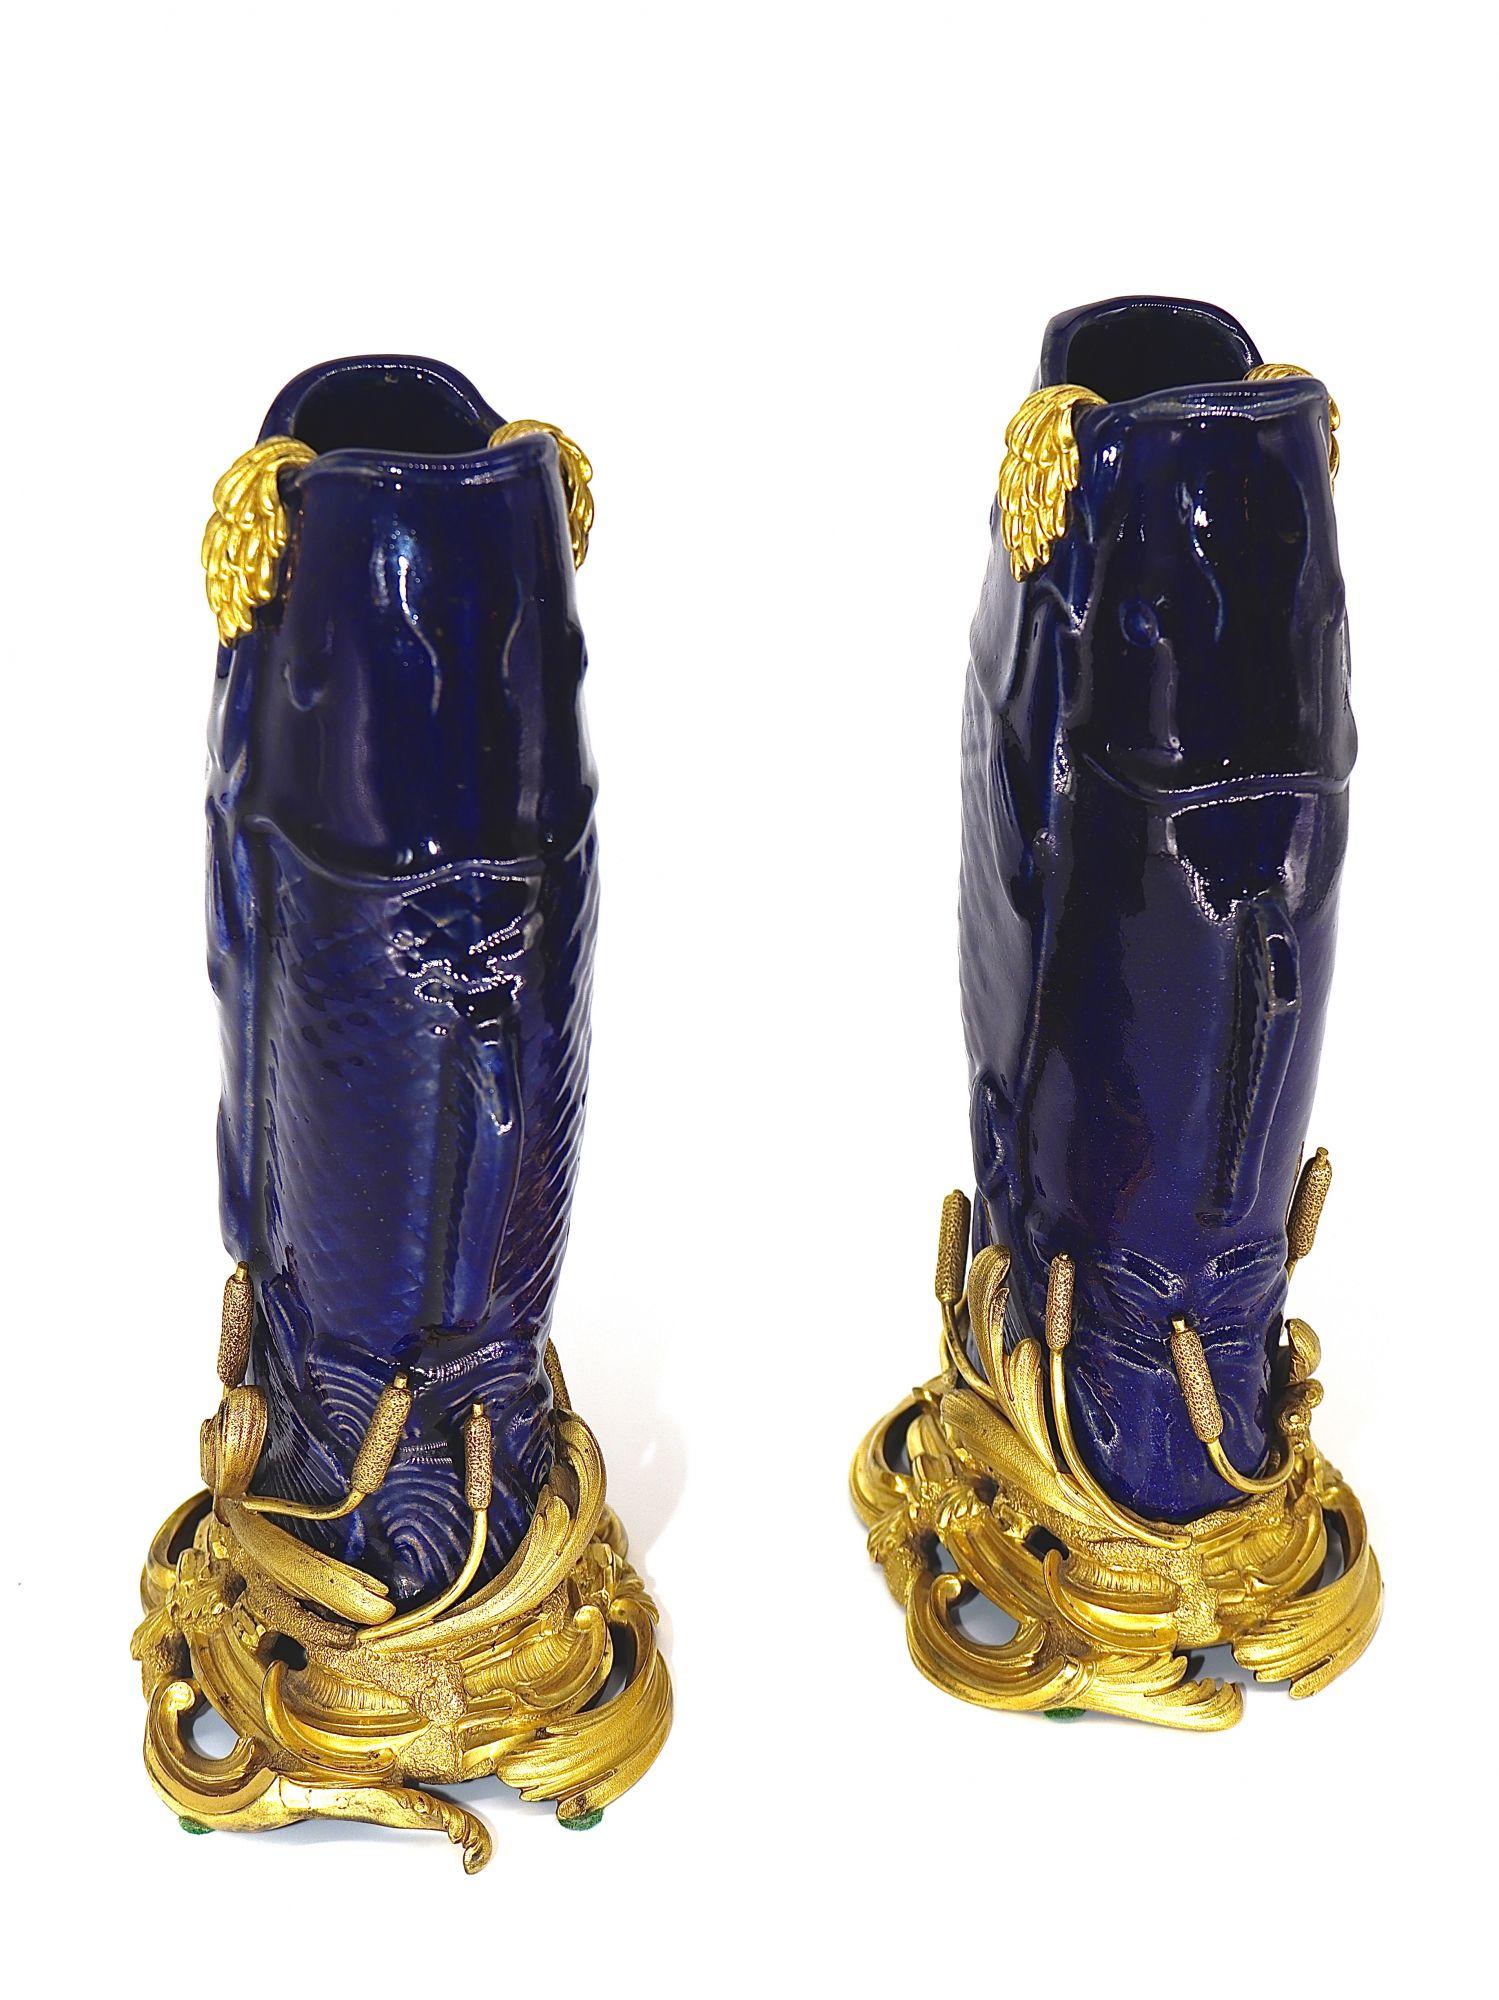 18th Century 1750 Circa, a Pair of Mounted Porcelain Karp Shaped Vases For Sale